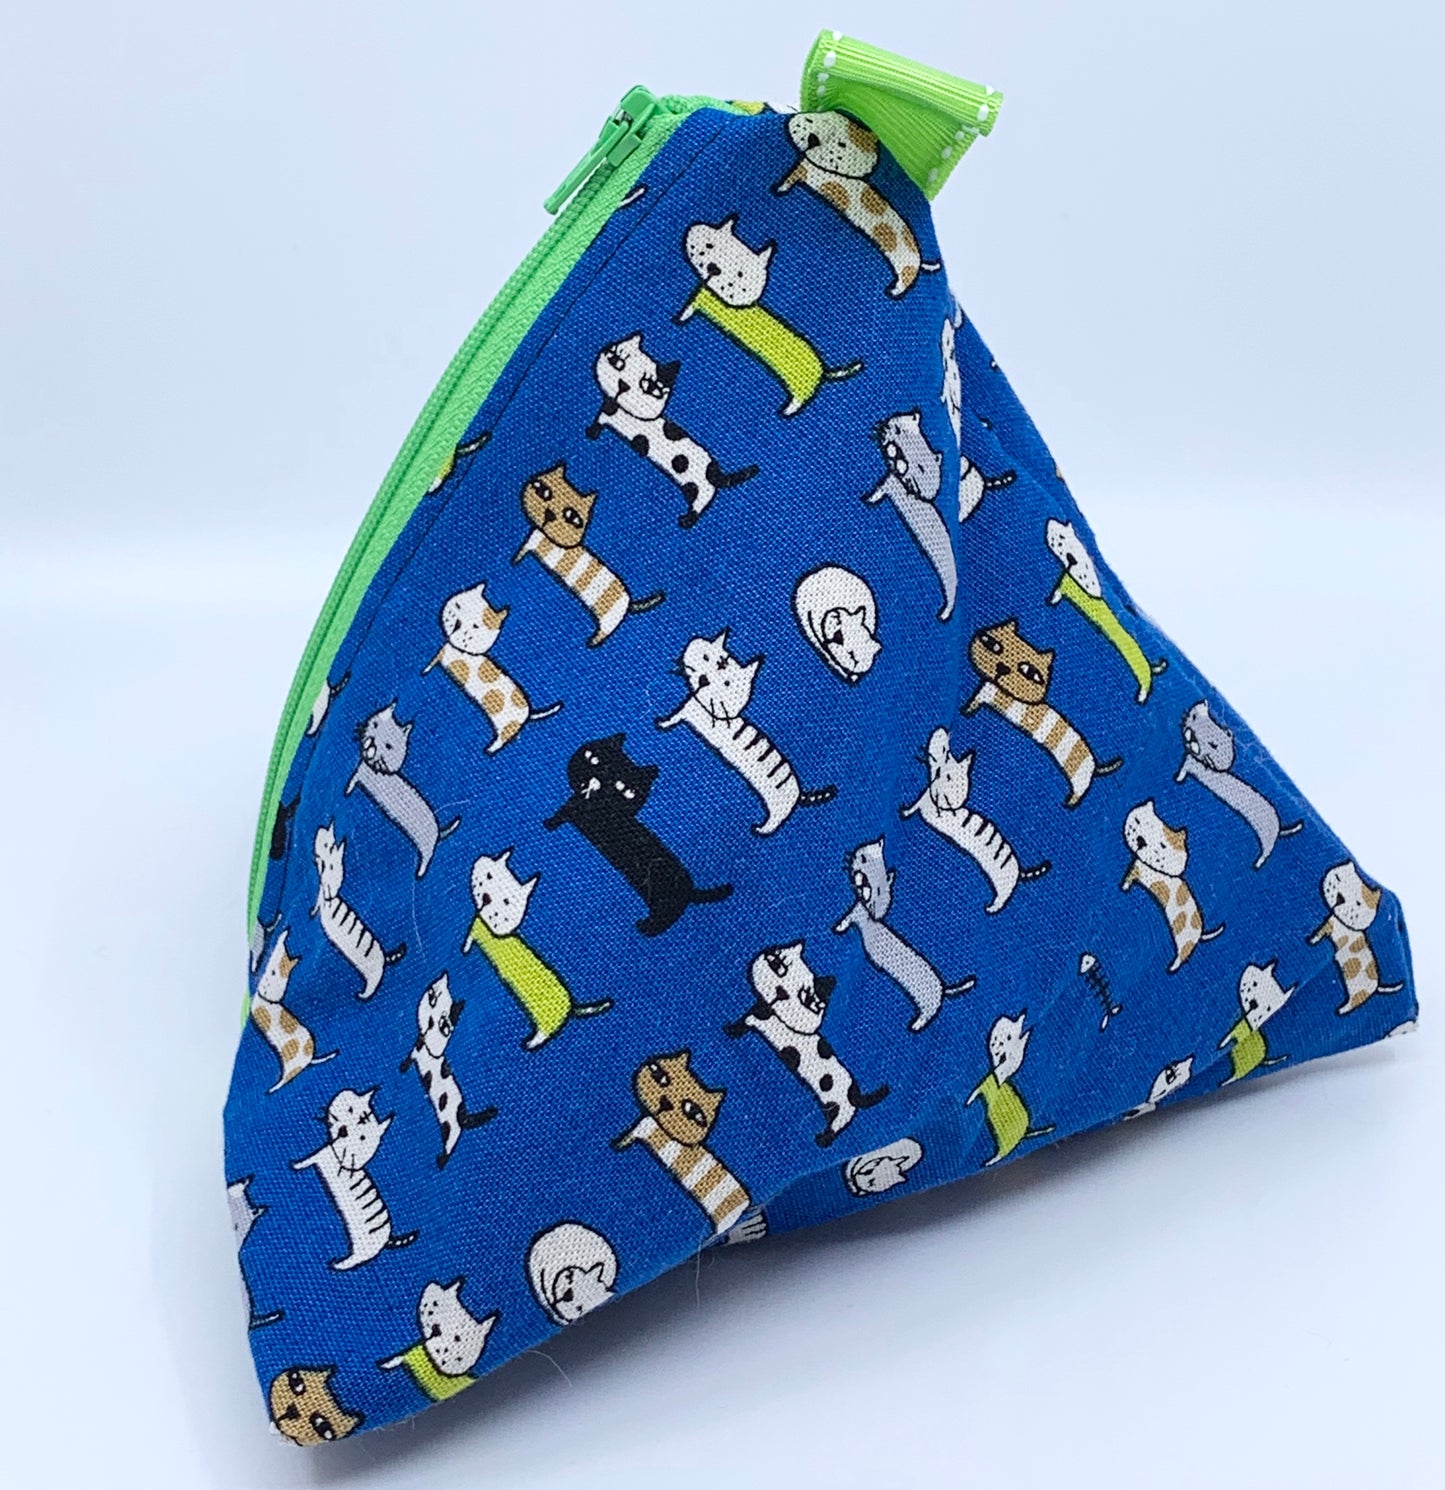 Triangle Pouch | Lined Up Cats on Bright Blue